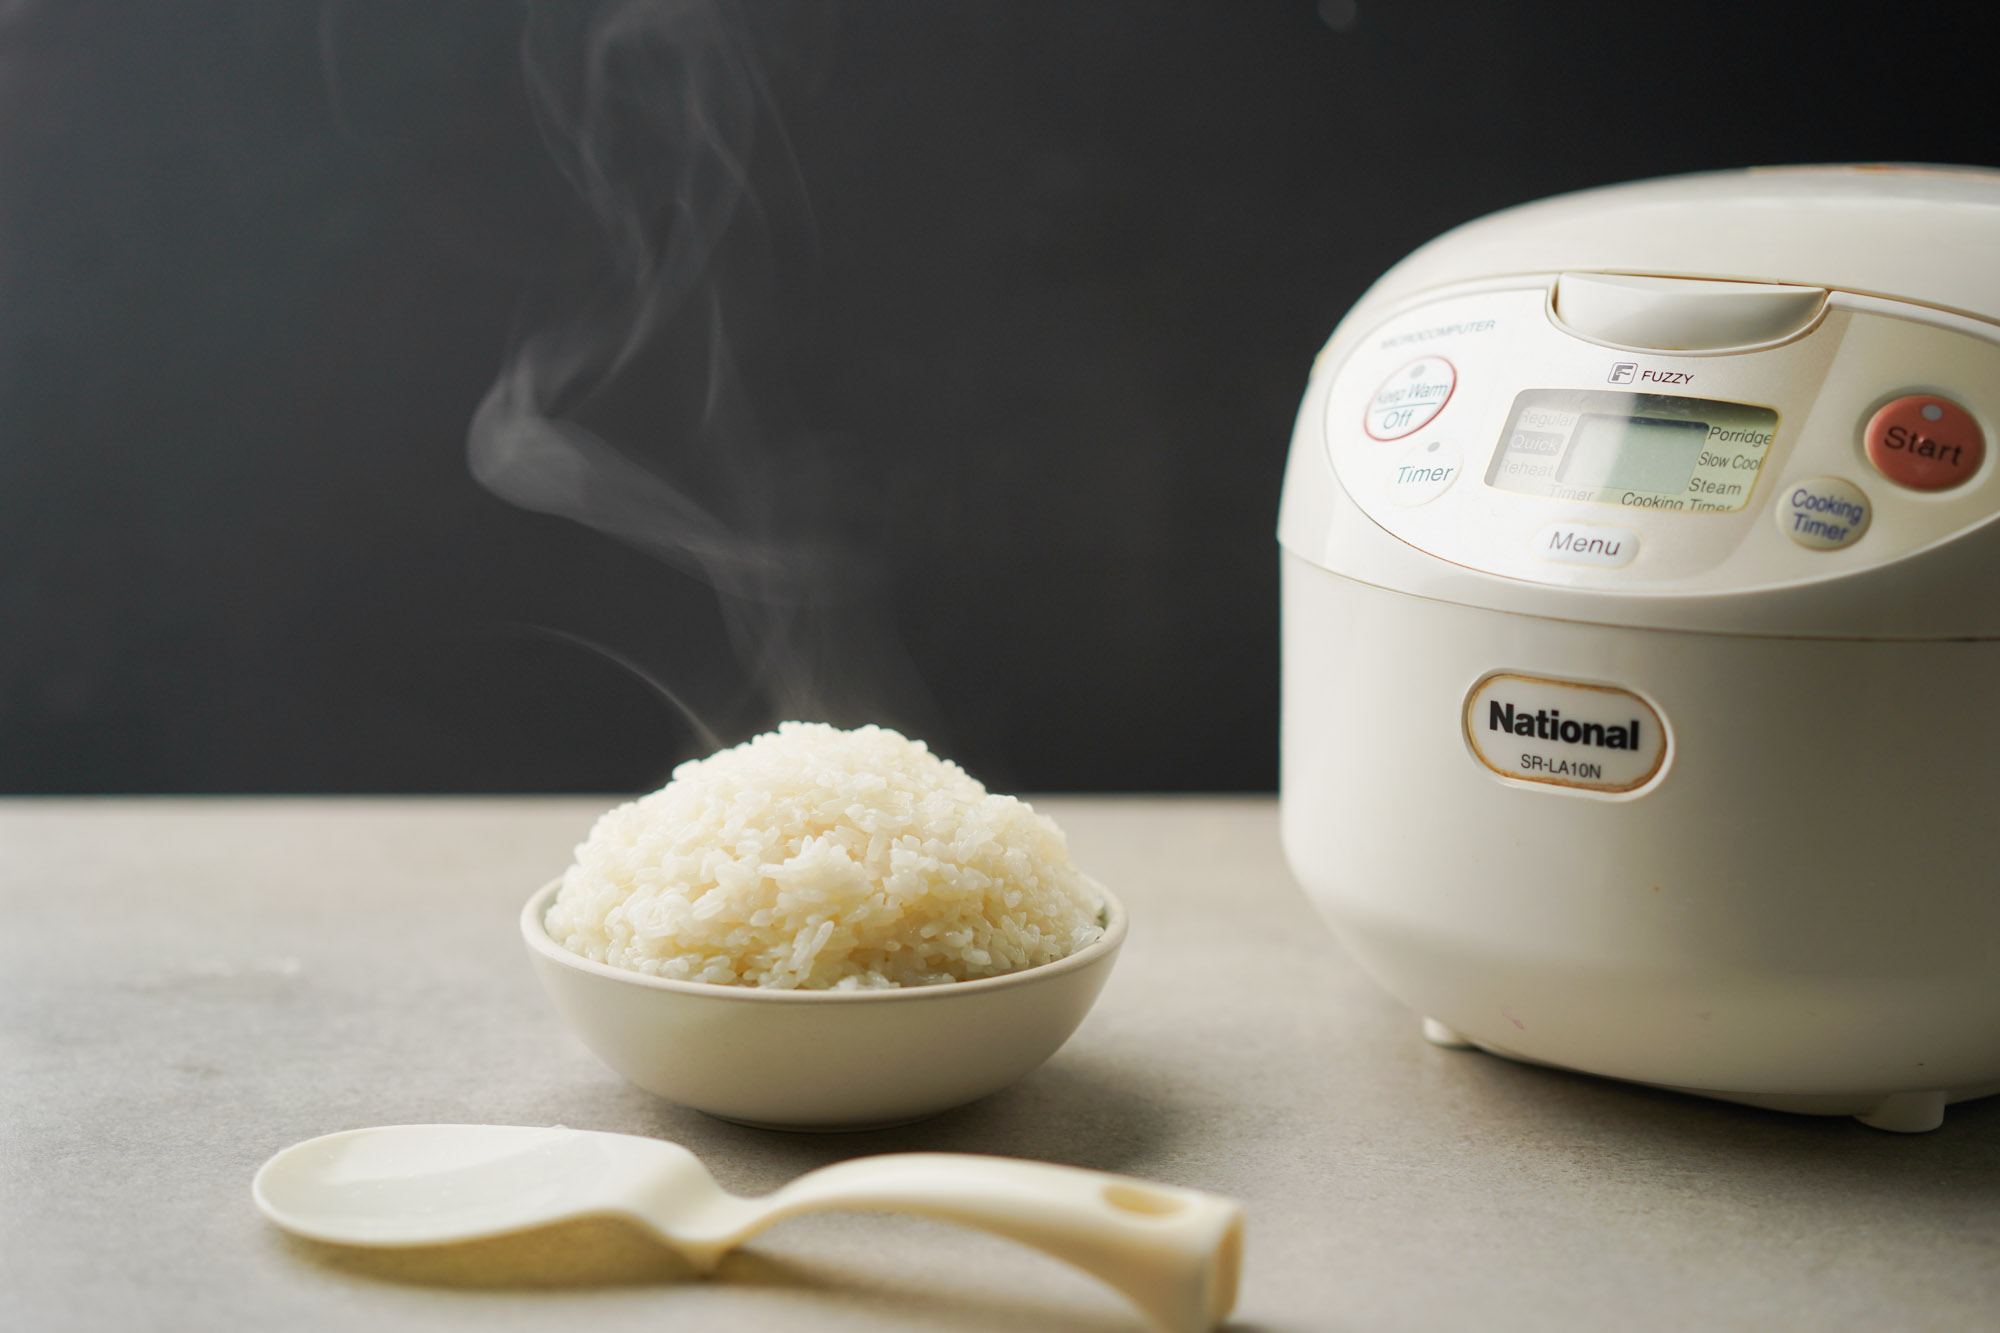 Sticky Rice Recipe in a Rice Cooker (Easy & Hands-off!) - Hungry Huy